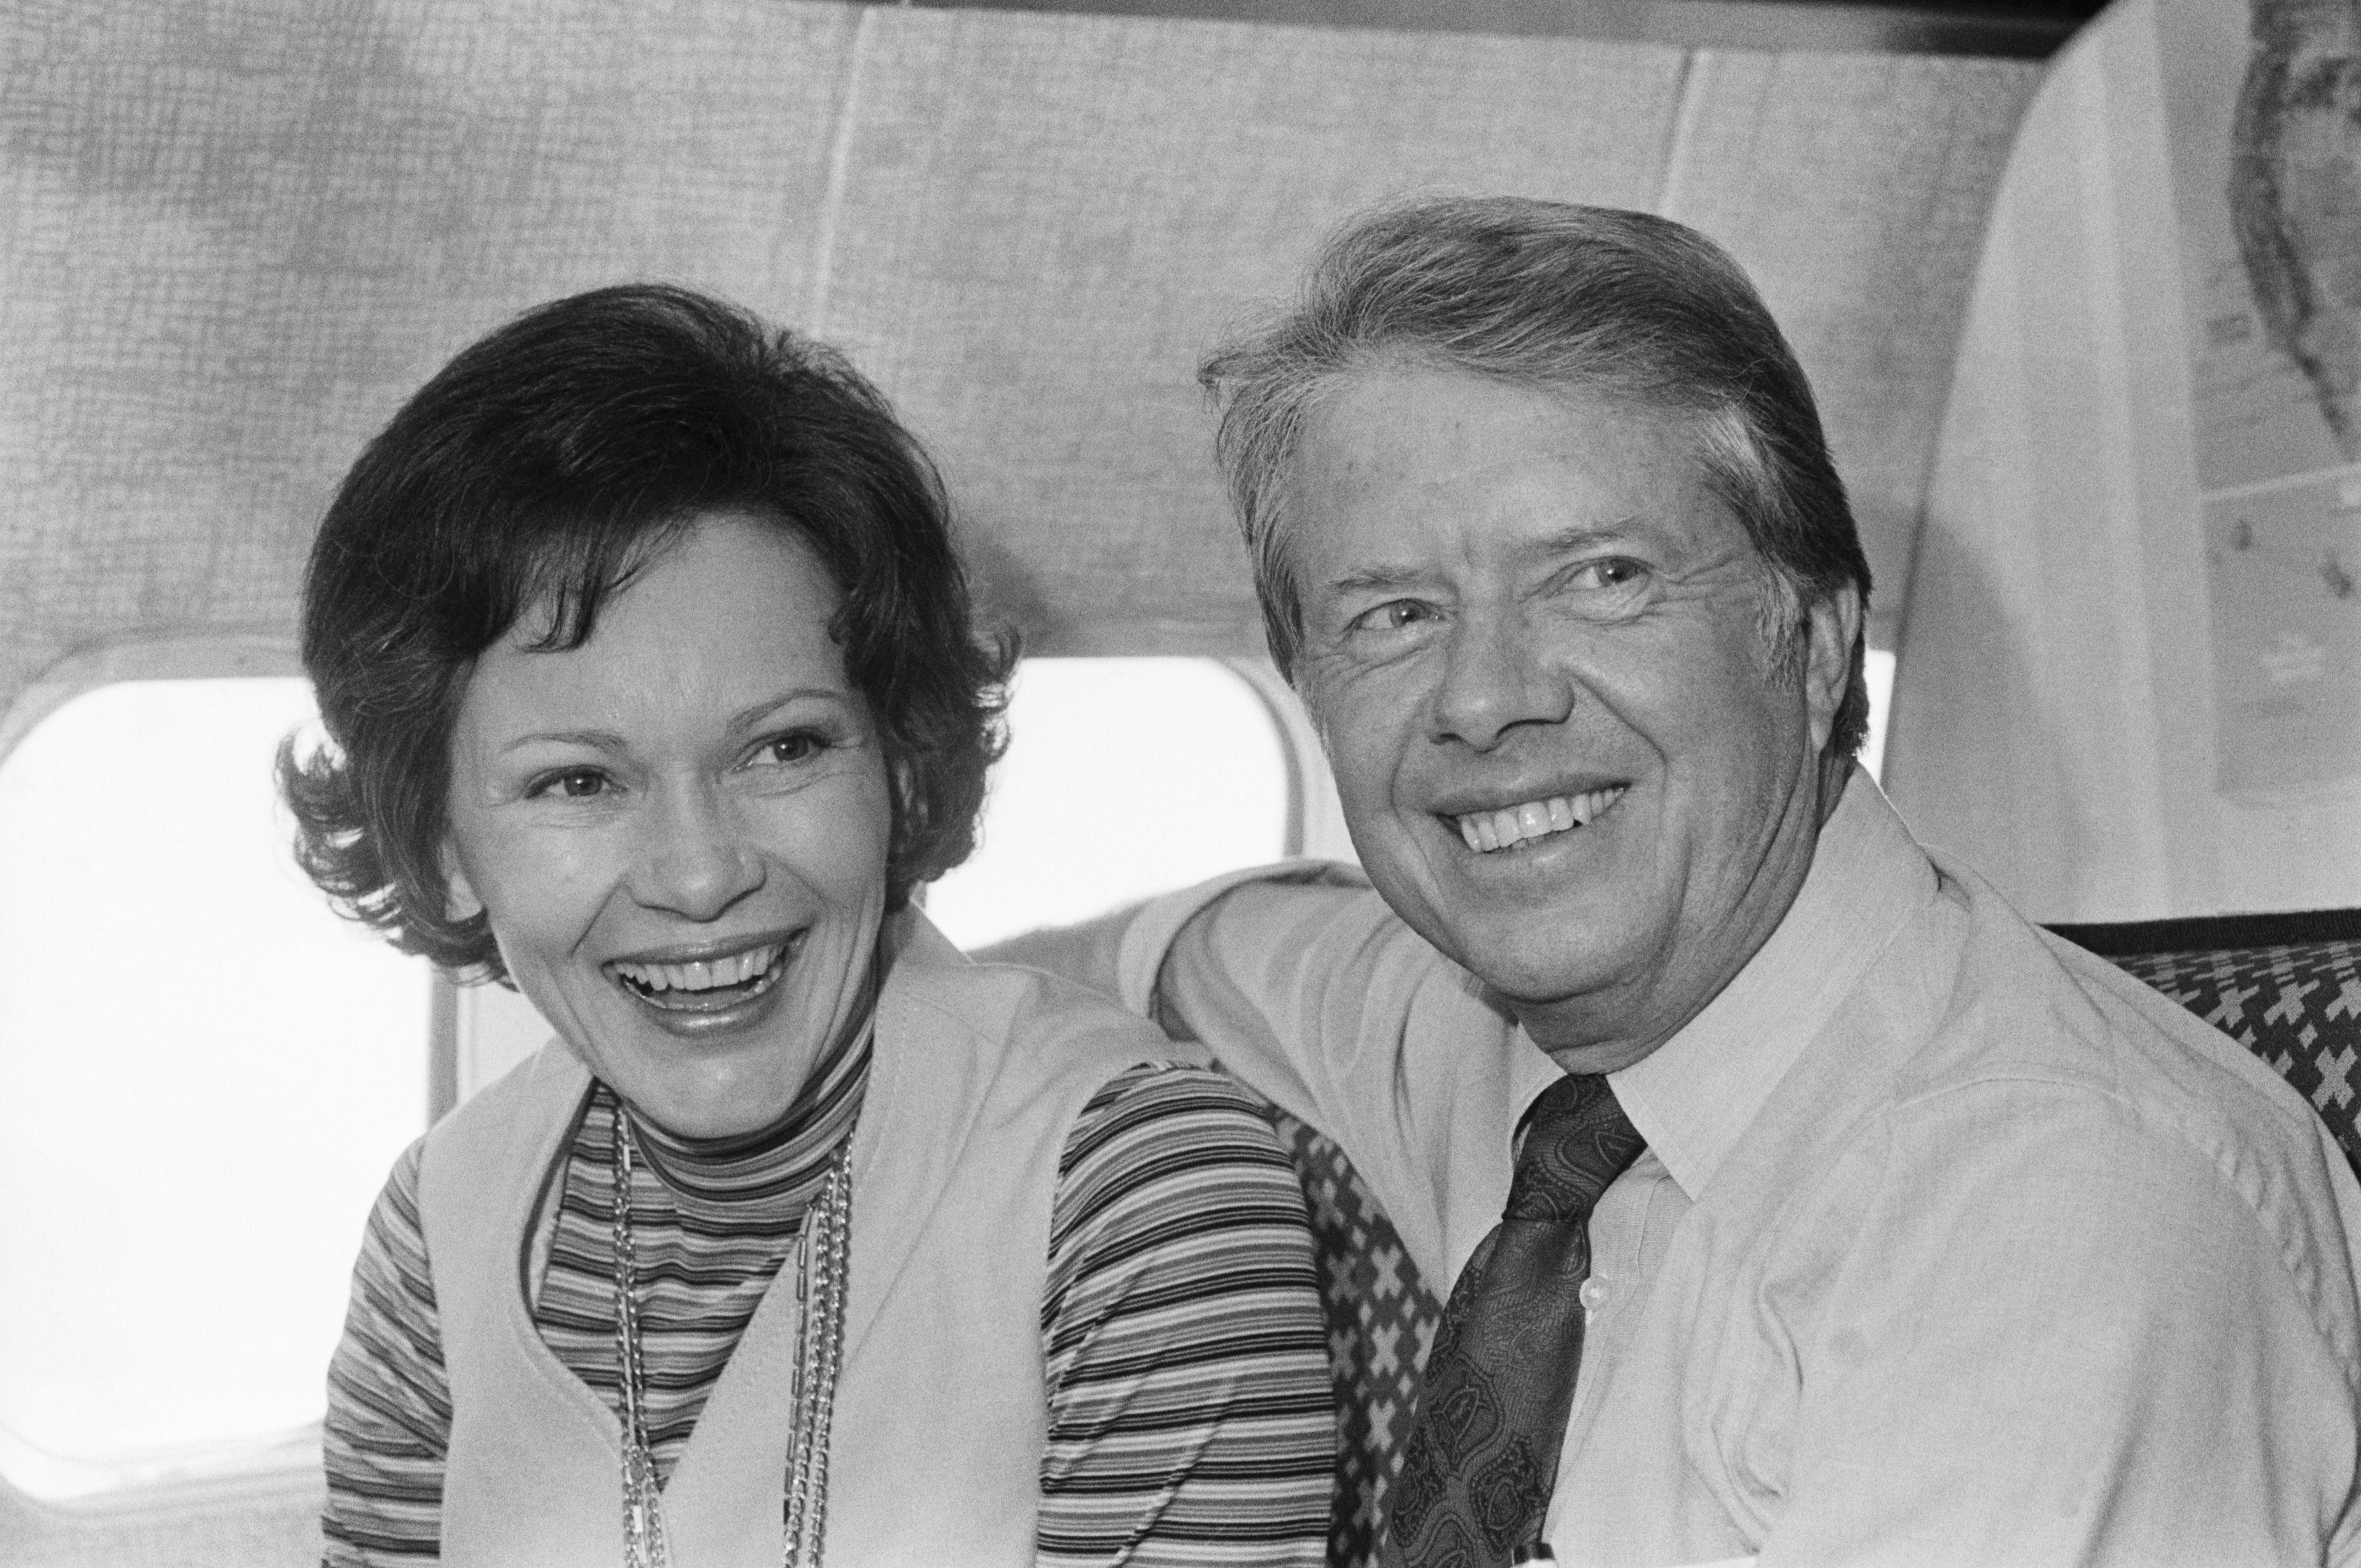 Former U.S. First Lady Rosalynn Carter and former U.S. President Jimmy Carter photographed together on a plane in 1976 . | Source: Getty Images